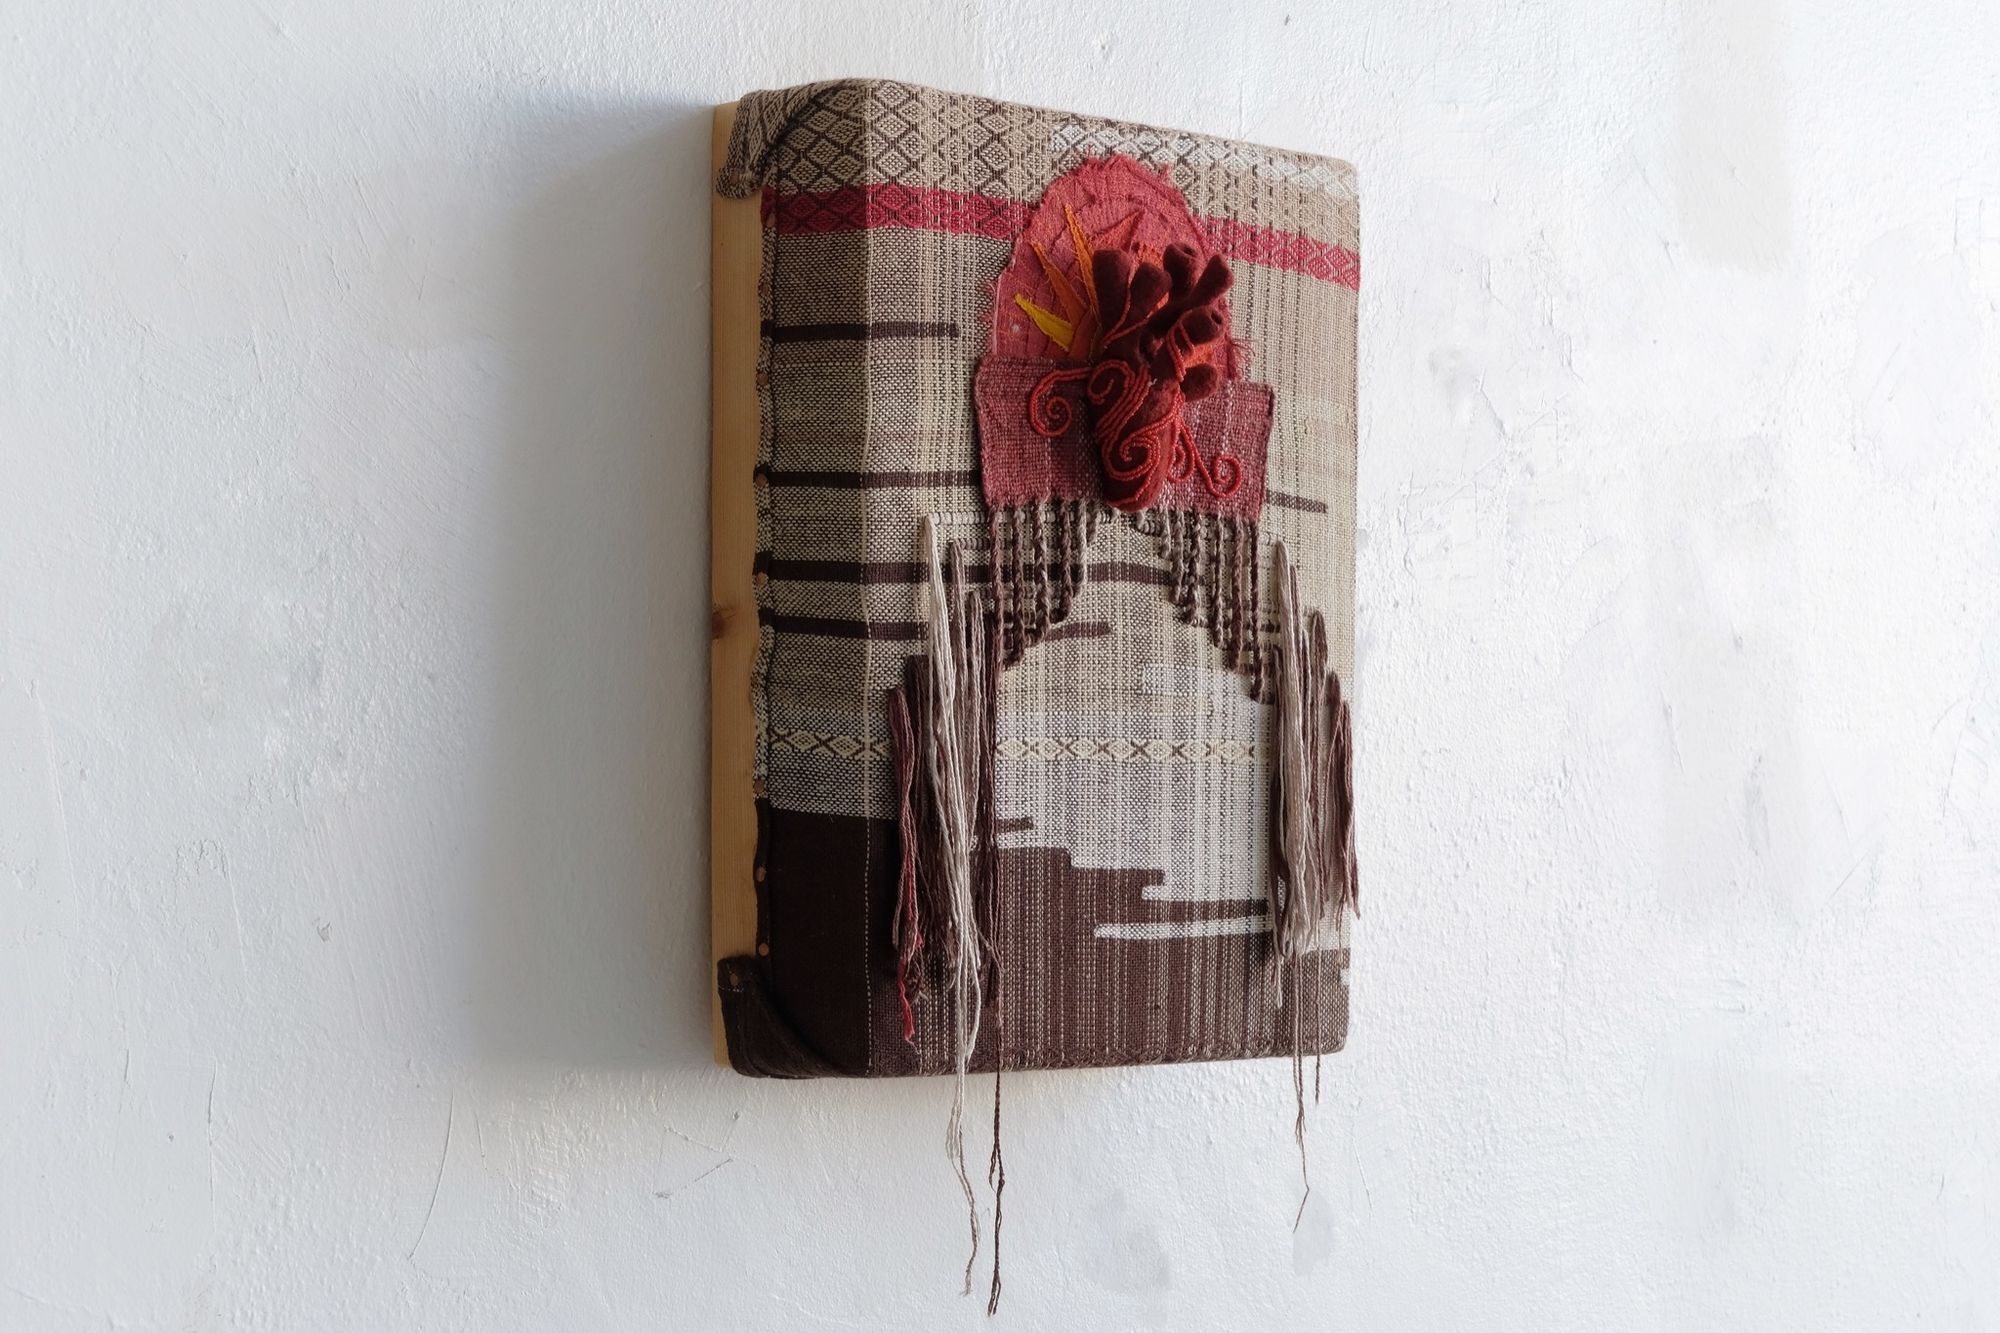 A textile wall sculpture with a red felted and beaded heart on textured handwoven brown, red and cream fabric. 